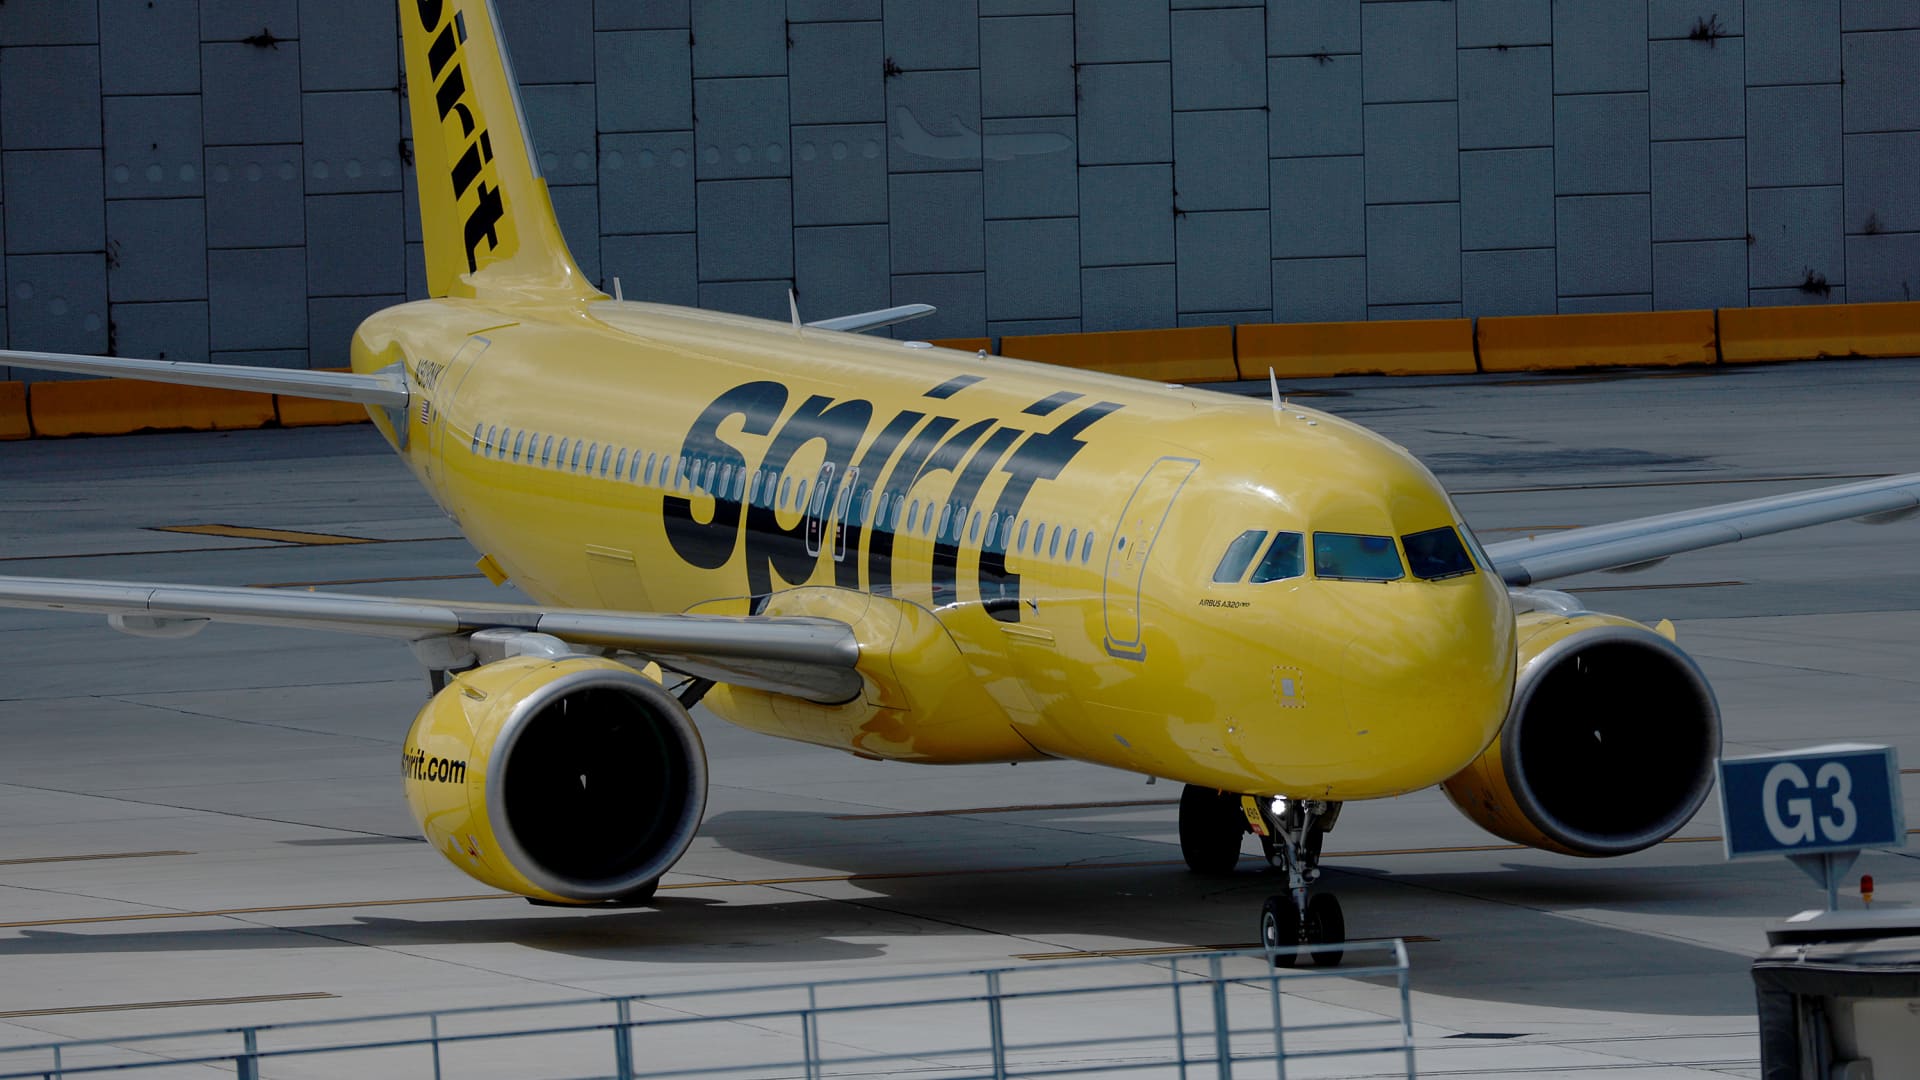 Spirit delays shareholder vote on merger hours before meeting to continue deal talks with Frontier, JetBlue